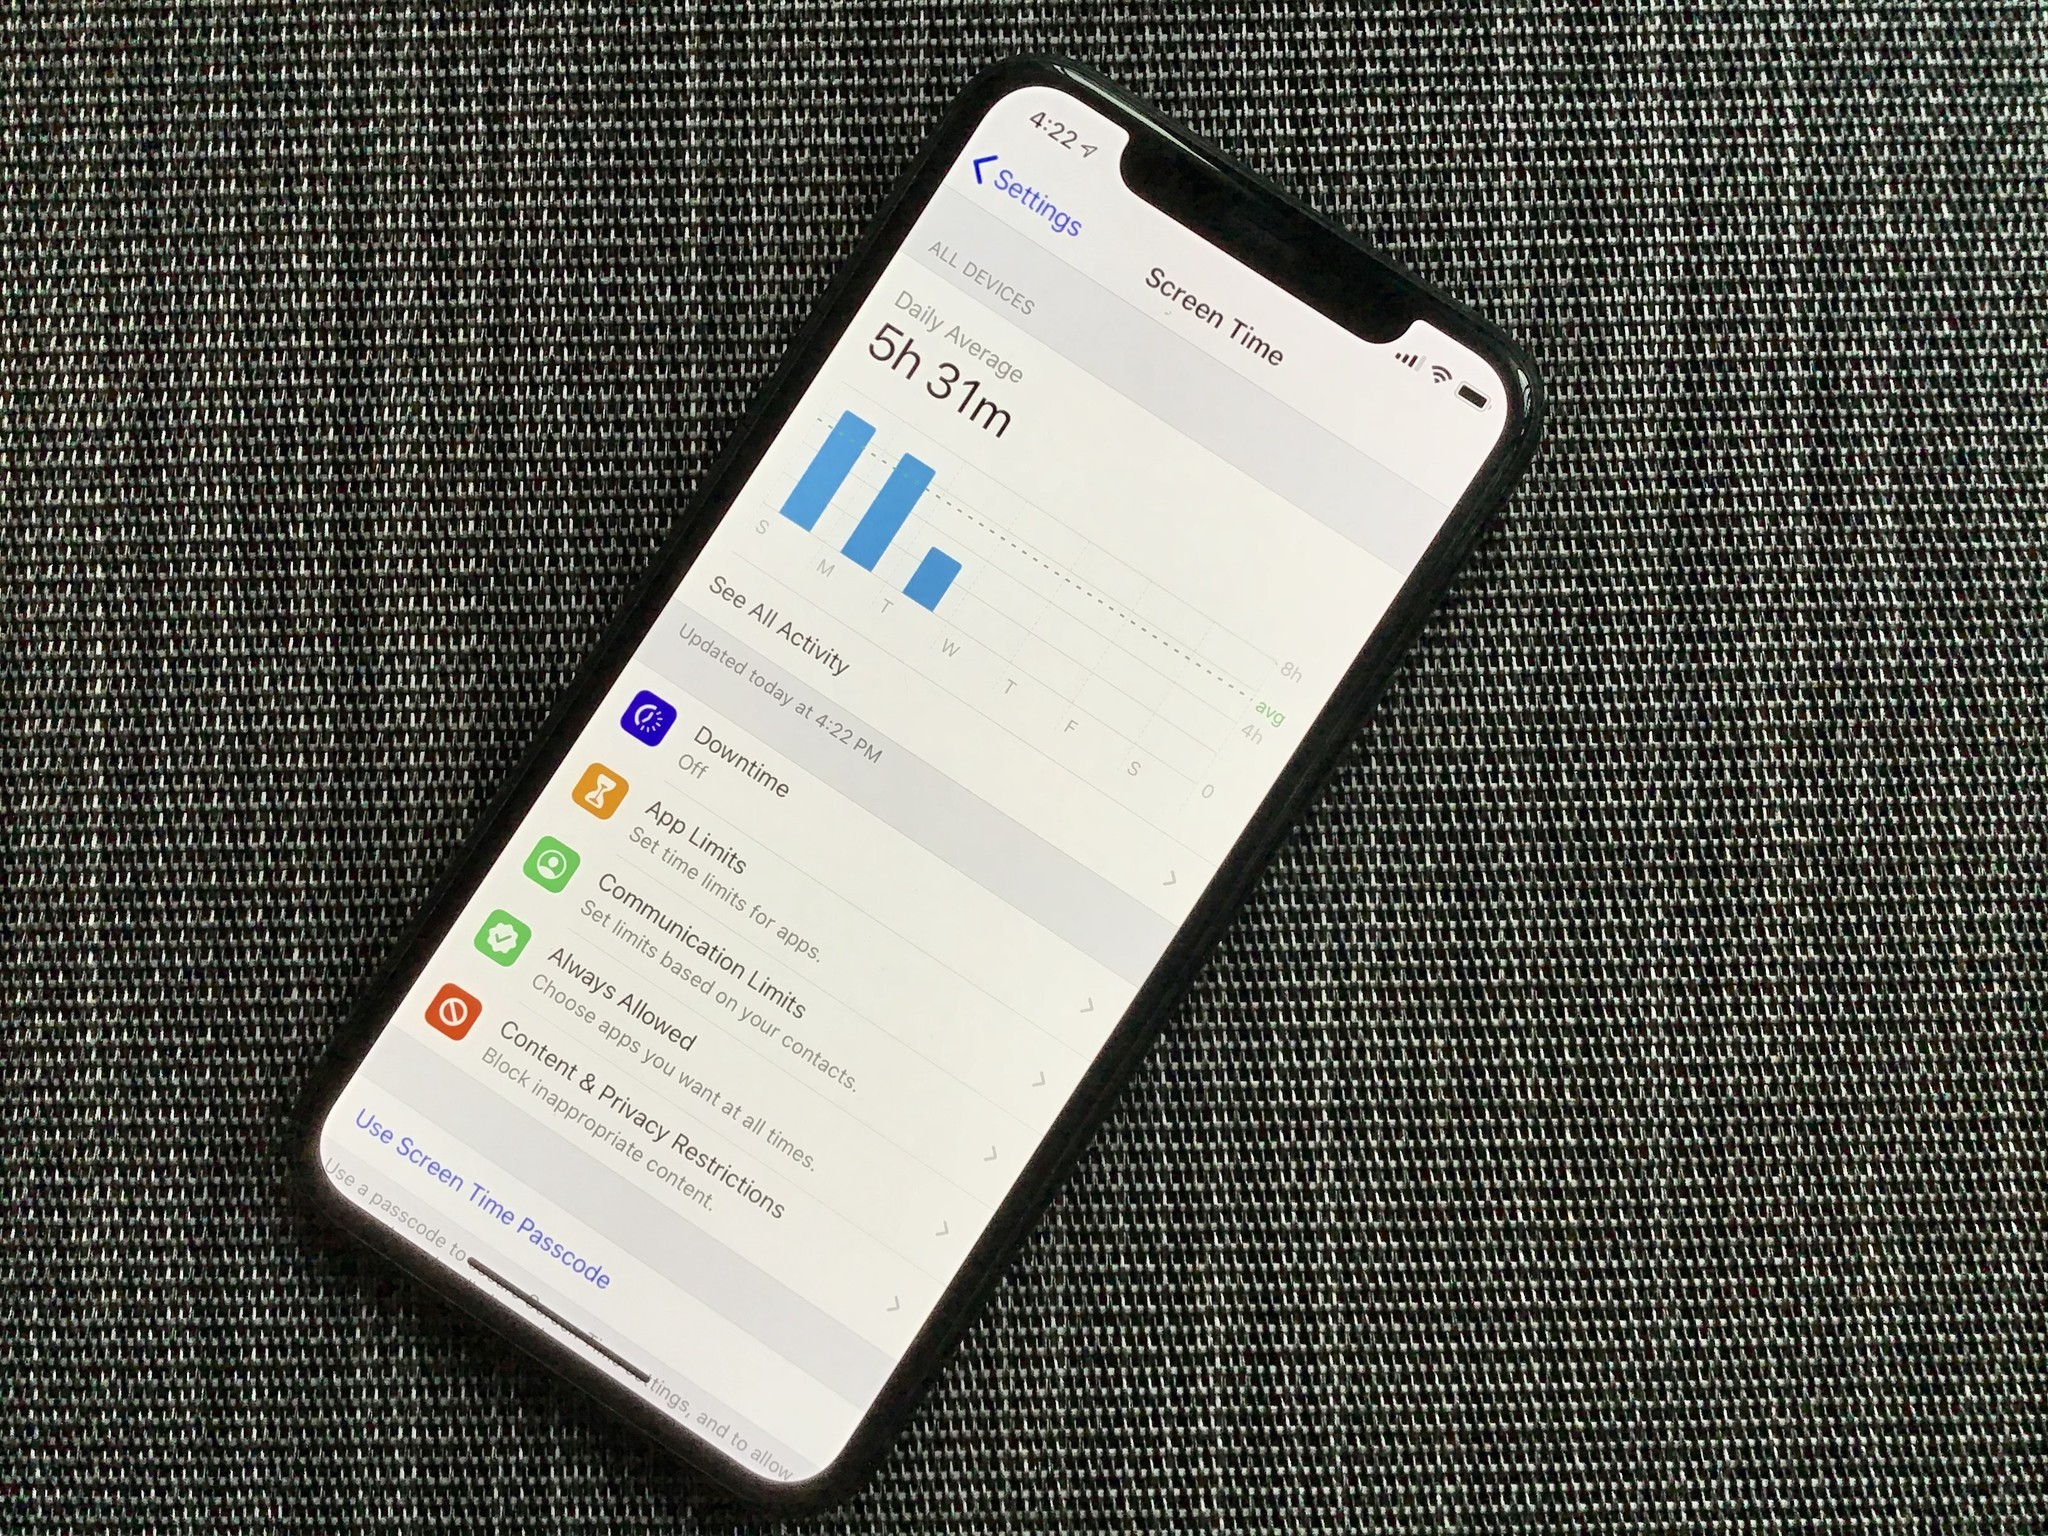 Screen Time on iPhone 11 Pro with iOS 13